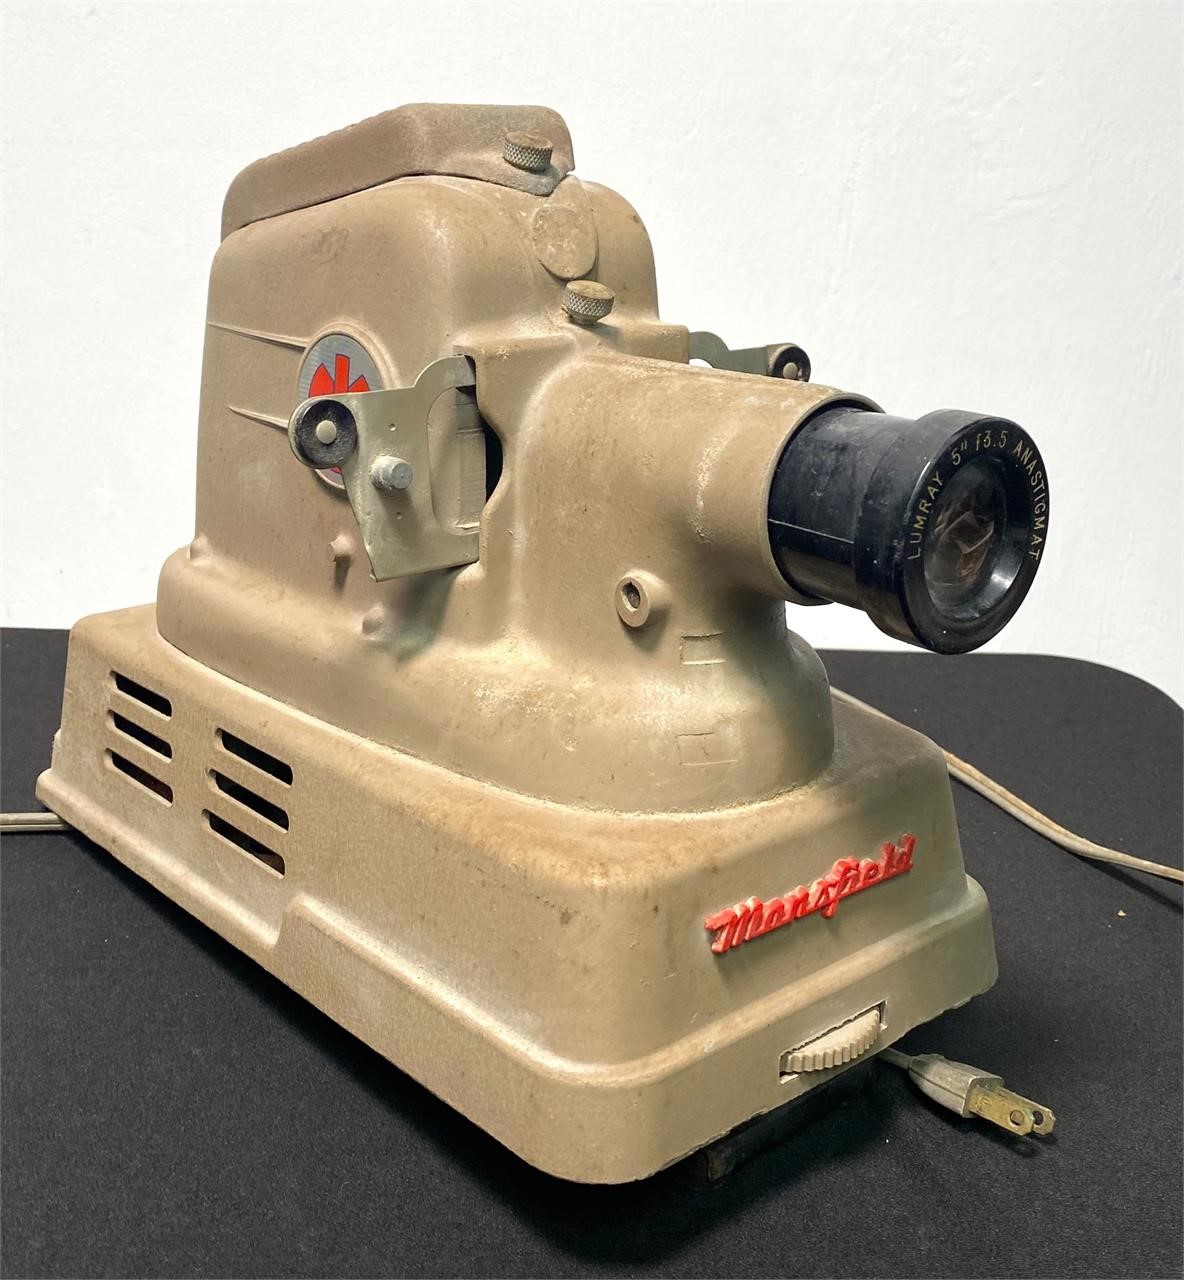 Midway 1958 Slide Projector